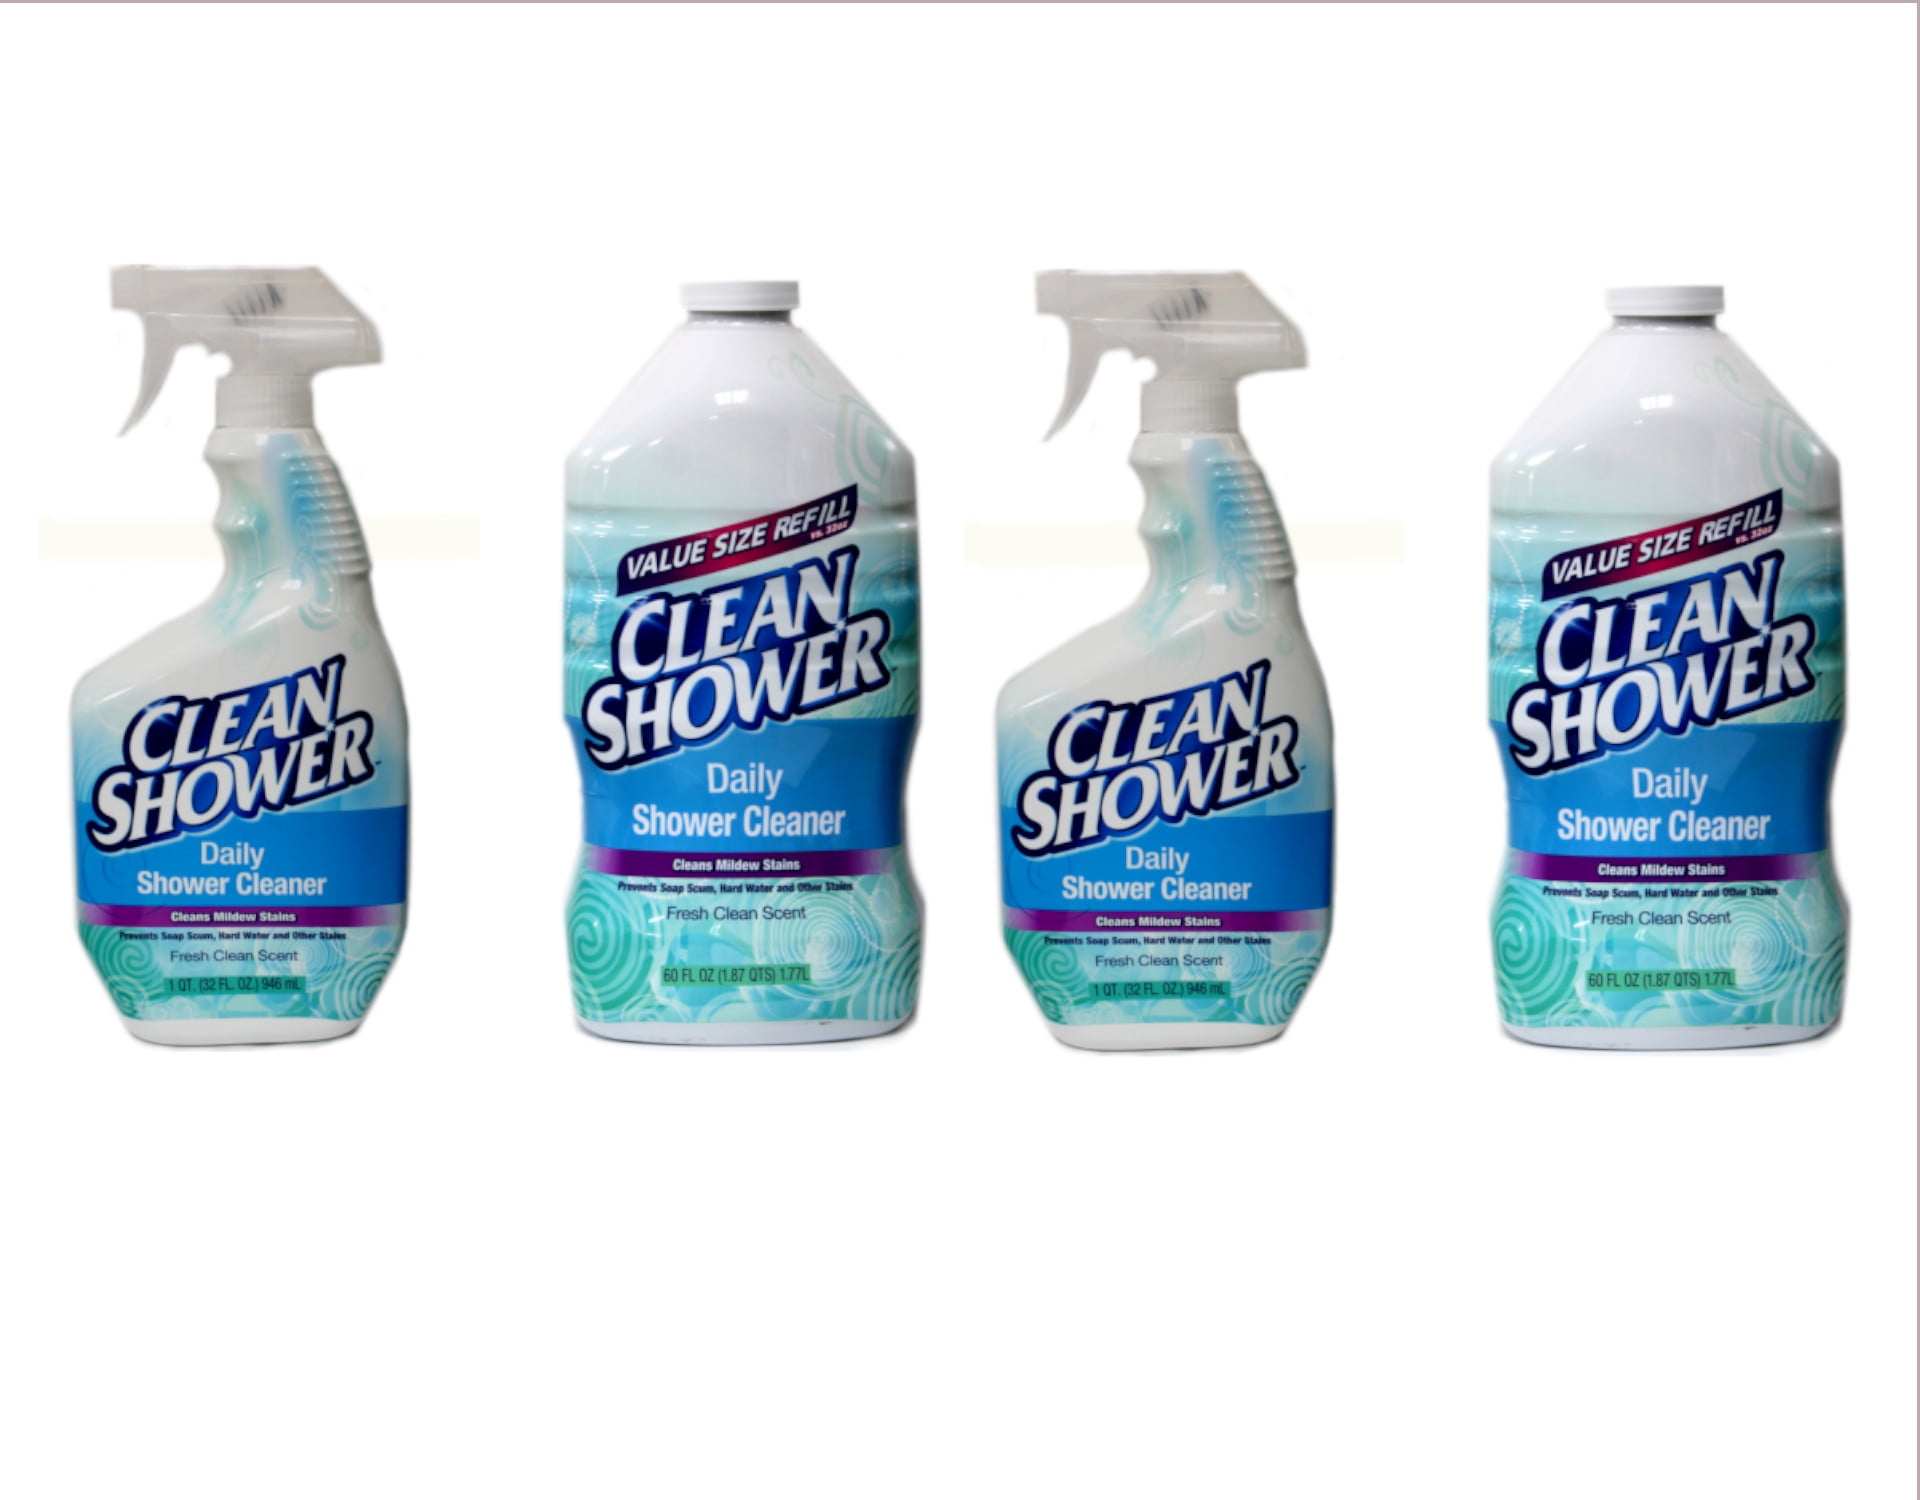 Clean Shower Fresh Clean Scent Daily Shower Cleaner Refill, 60oz - 2 Pack